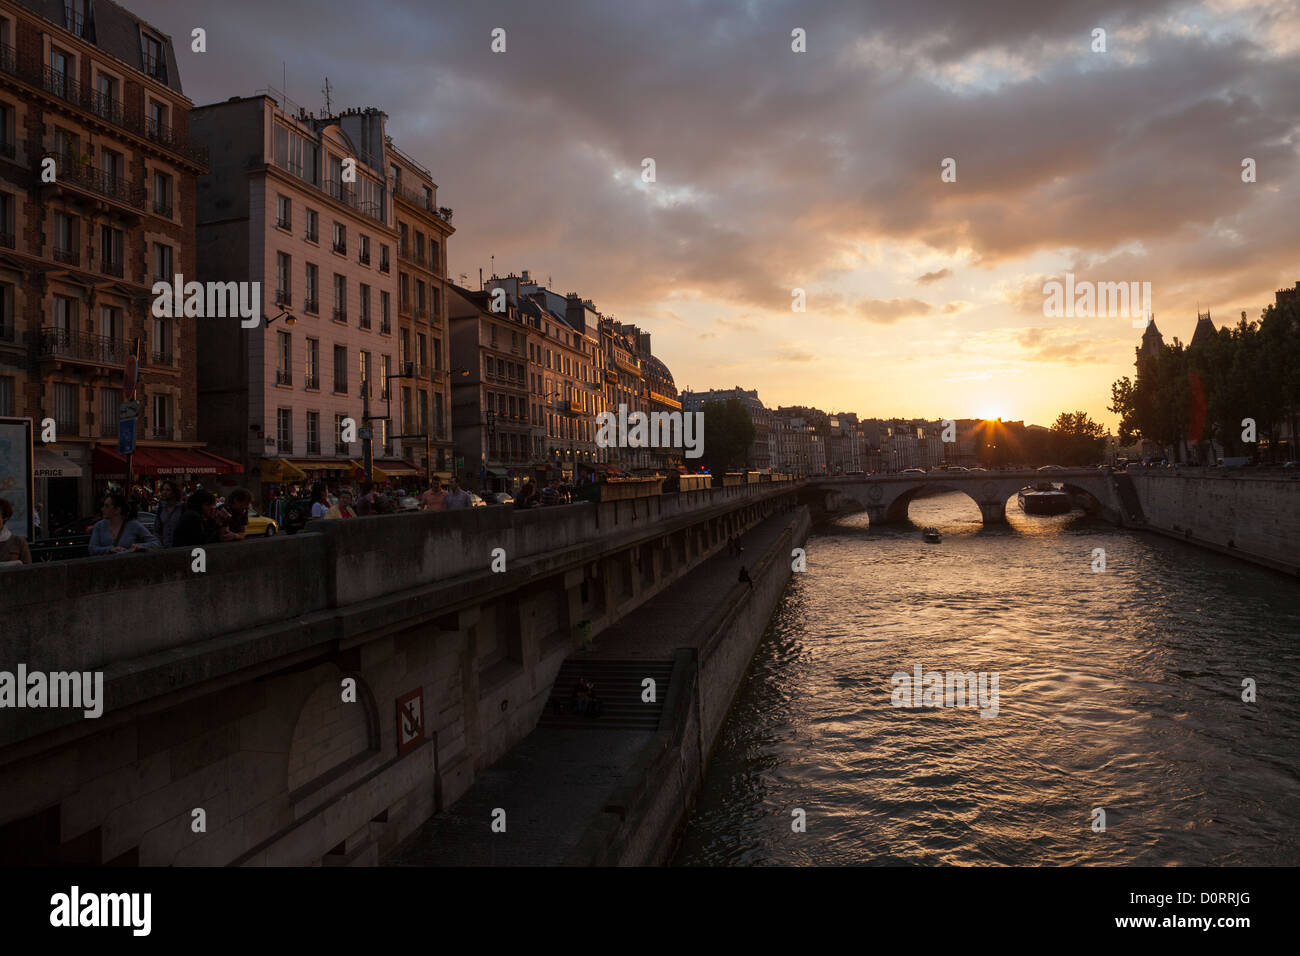 Looking West along the River Seine in the 4th arrondissement, Paris. Stock Photo